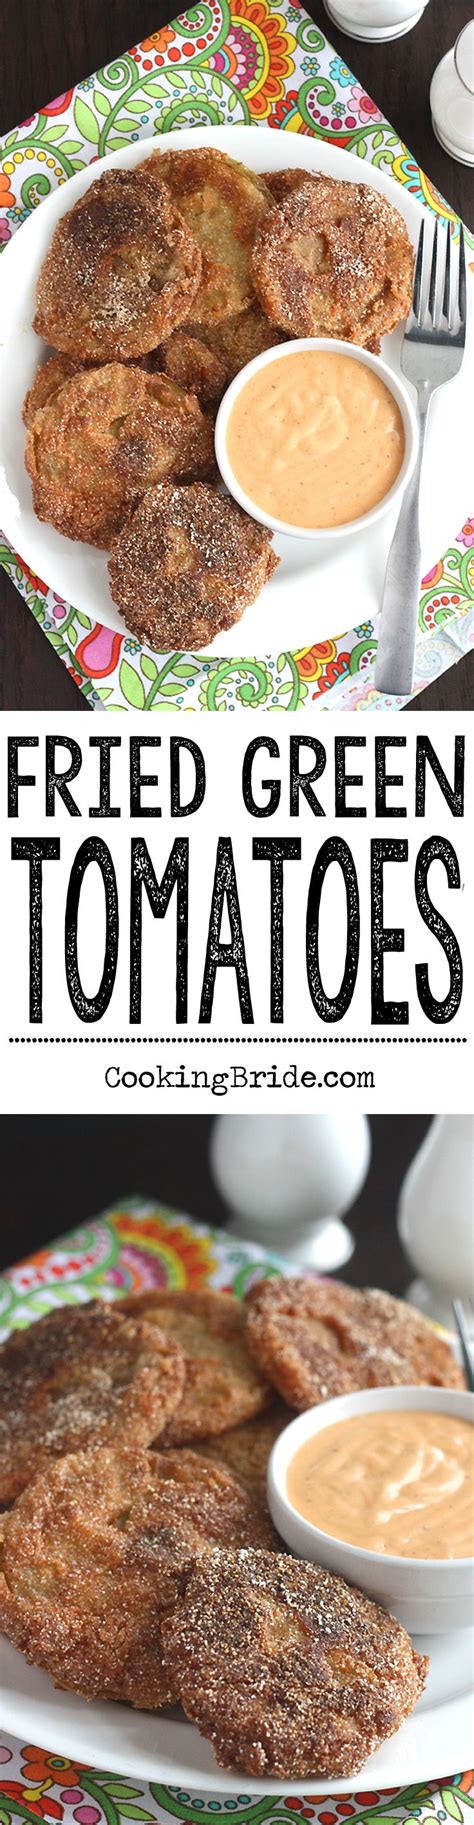 Fried tomatoes are best eaten immediately after frying. How to Make Fried Green Tomatoes | Recipe | Appetizer ...